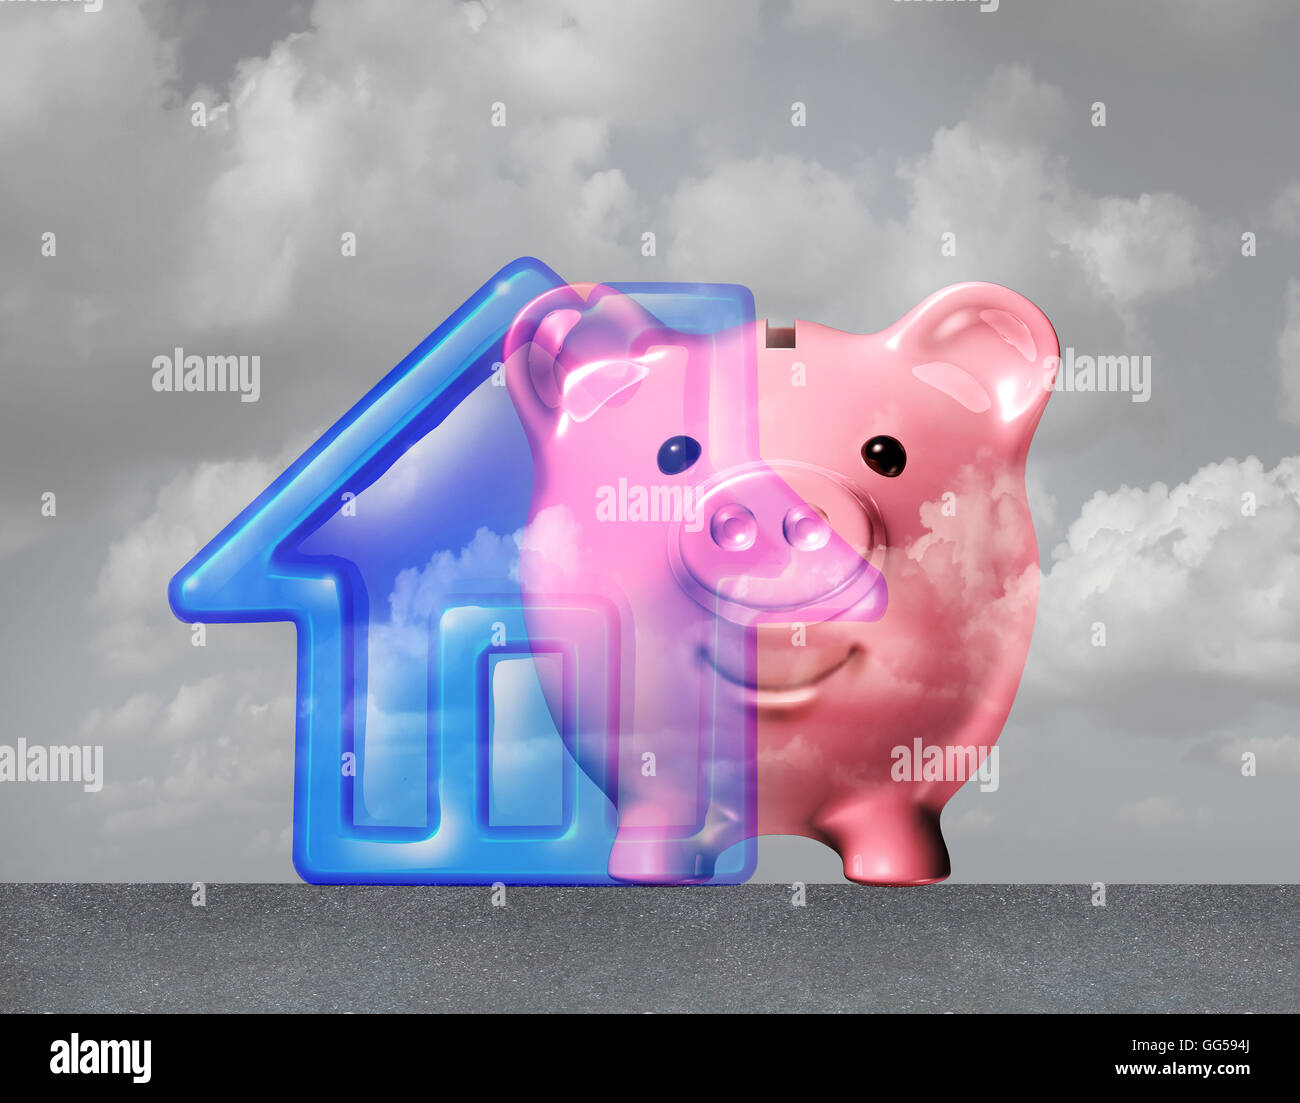 Home down payment and house mortgage symbol as a family residence symbol merging with a piggy bank as a real estate financial metaphor with 3D illustration elements. Stock Photo